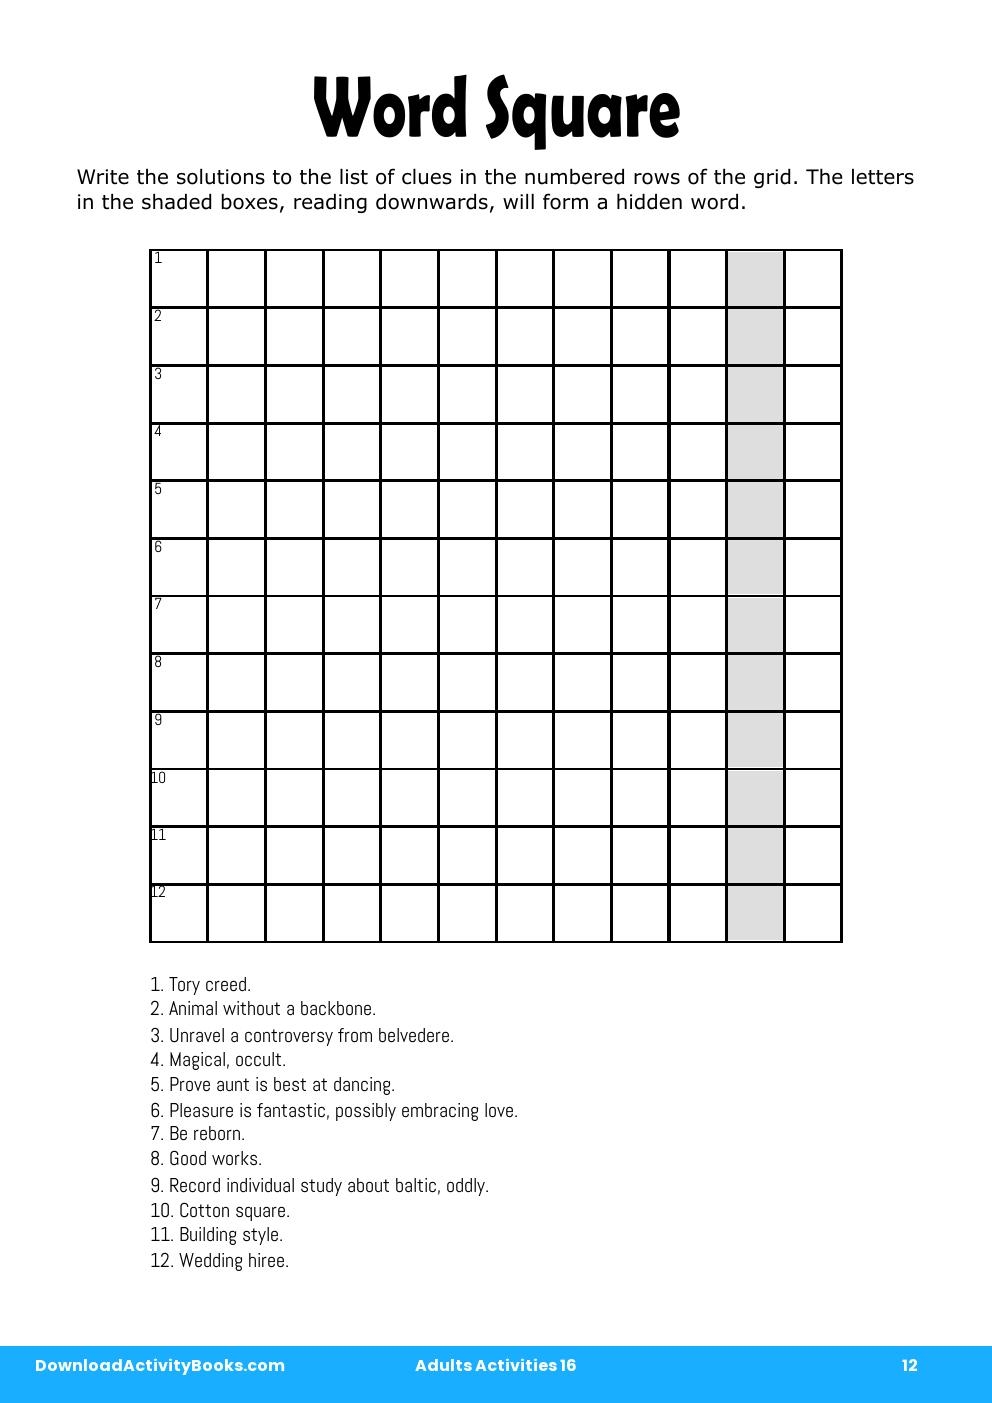 Word Square in Adults Activities 16